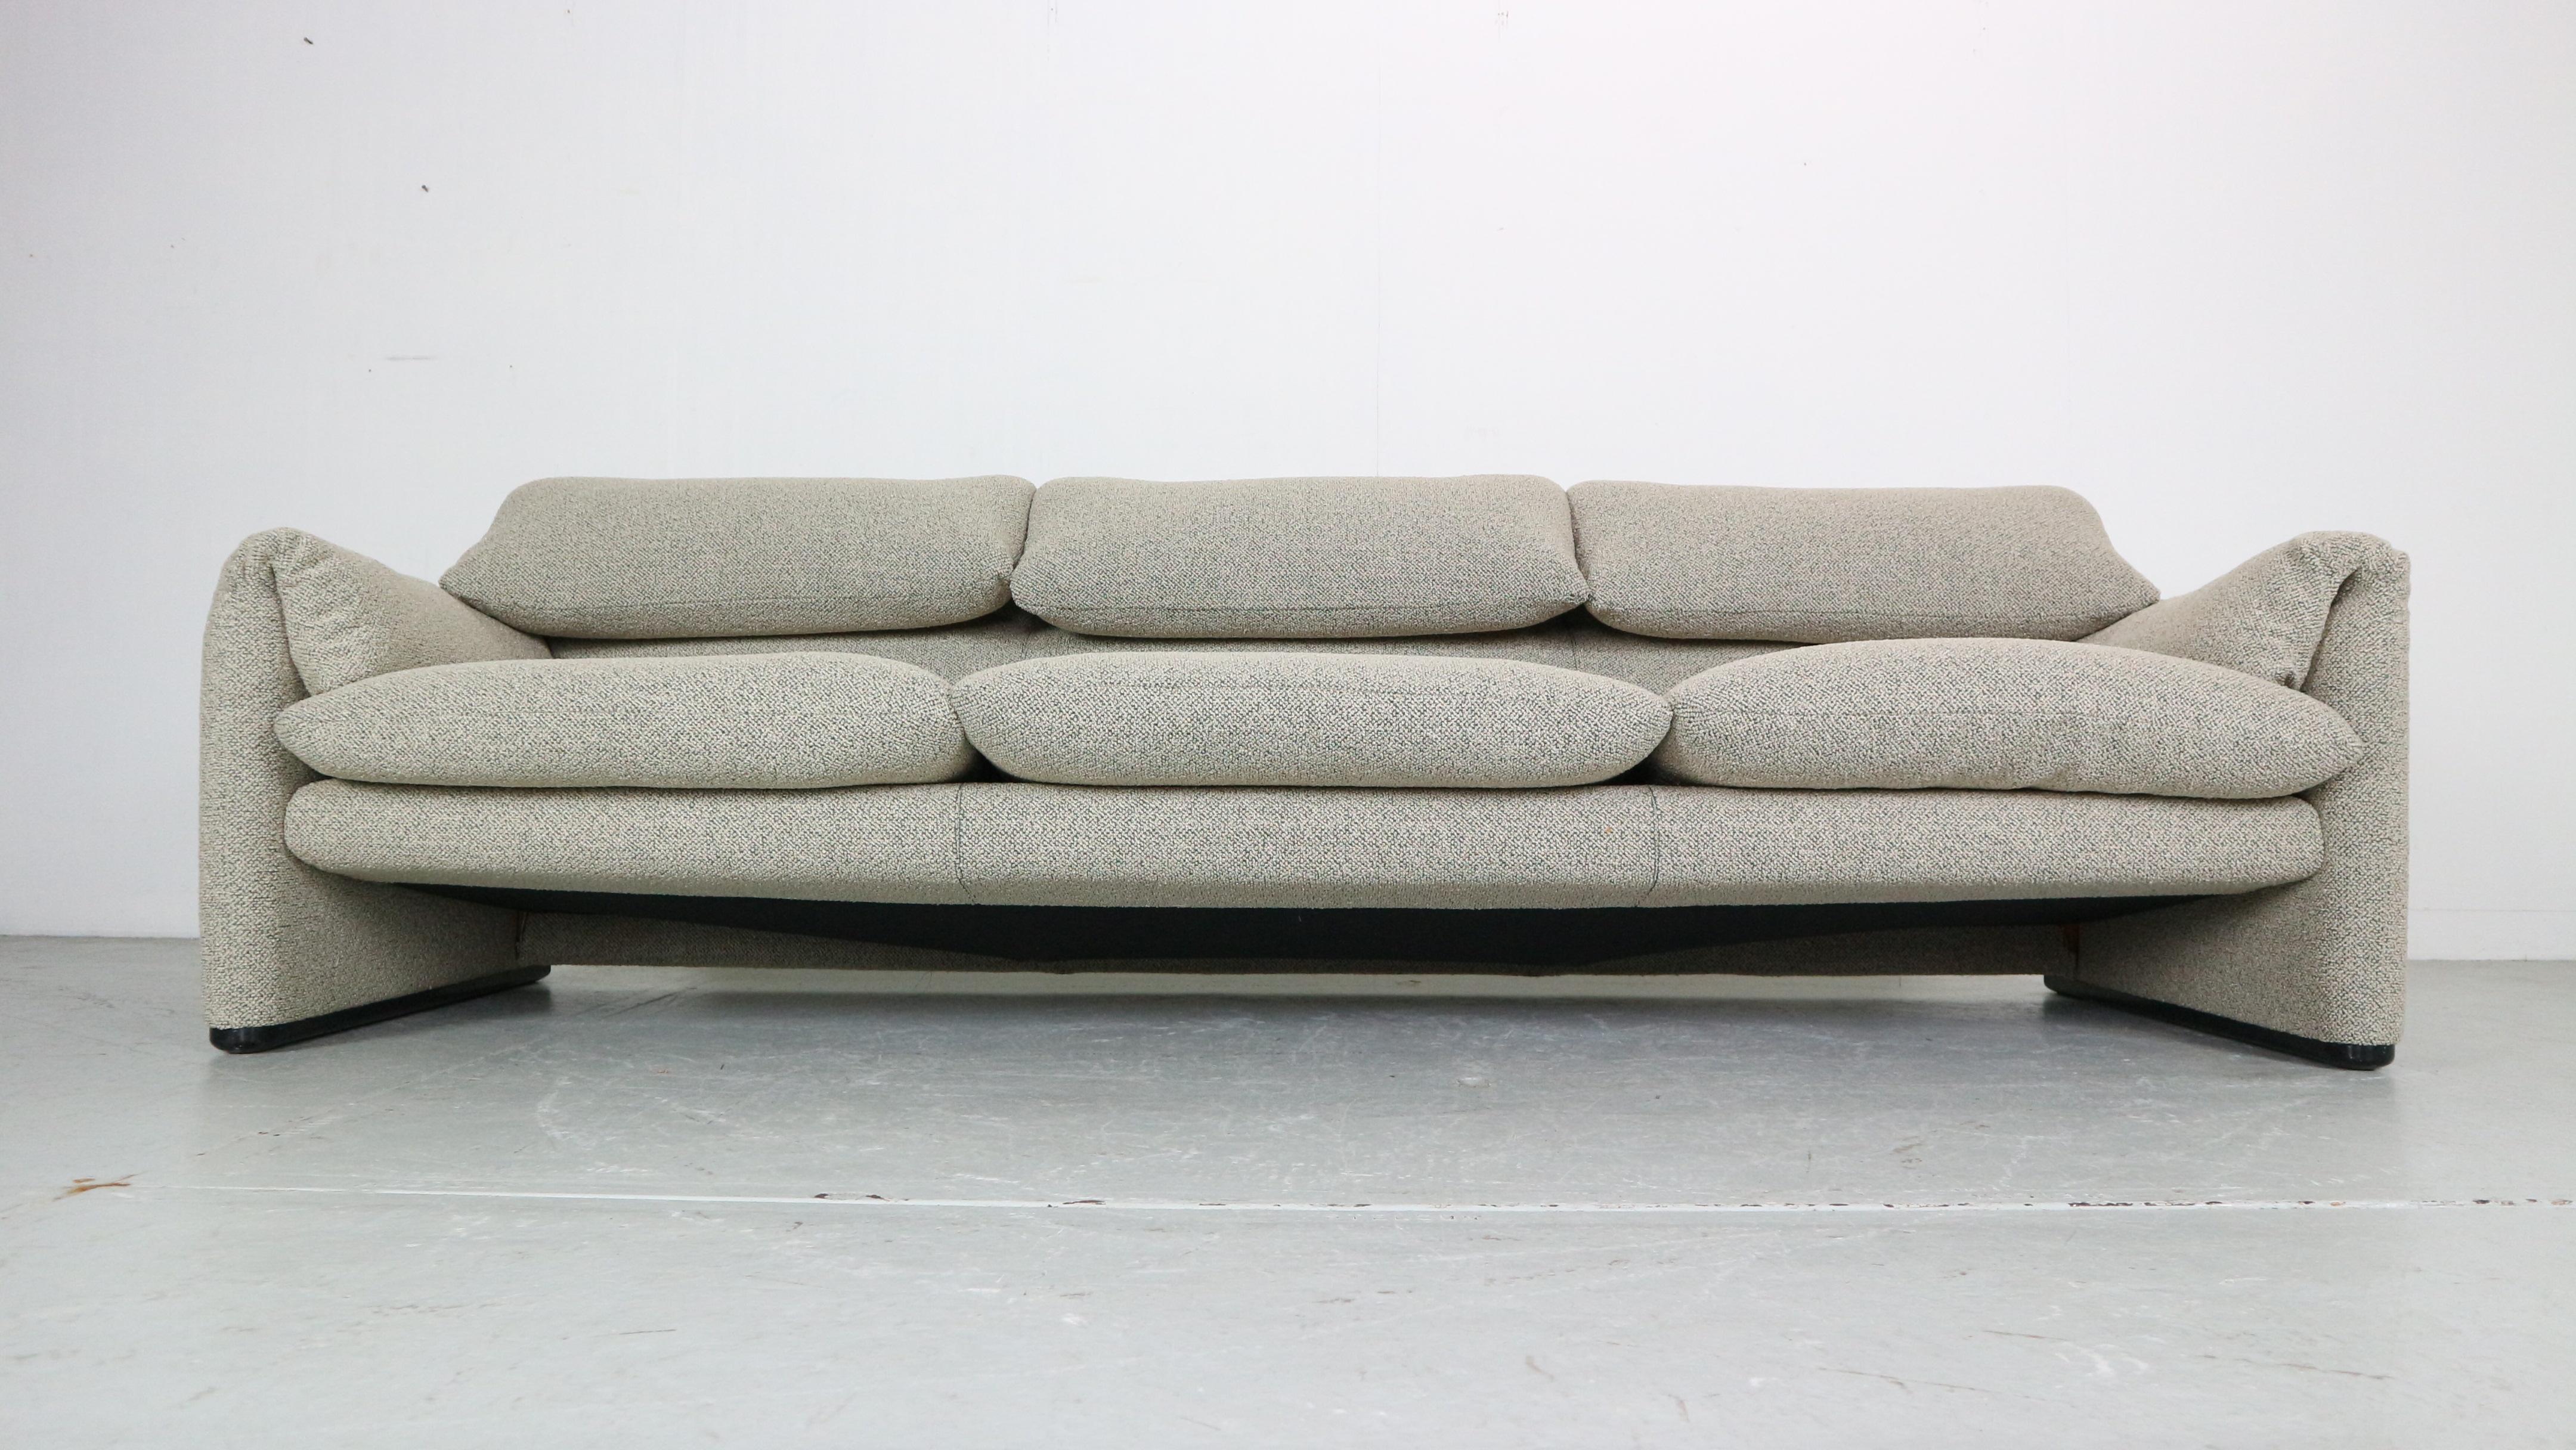 If it's classic Italian style you're after, look no further!

Maralunga 3-seat Sofa, designed 1973 by Vico Magistretti for Cassina. This sofa features folding back rests cushions that can be folded down, or folded up to provide the user with more